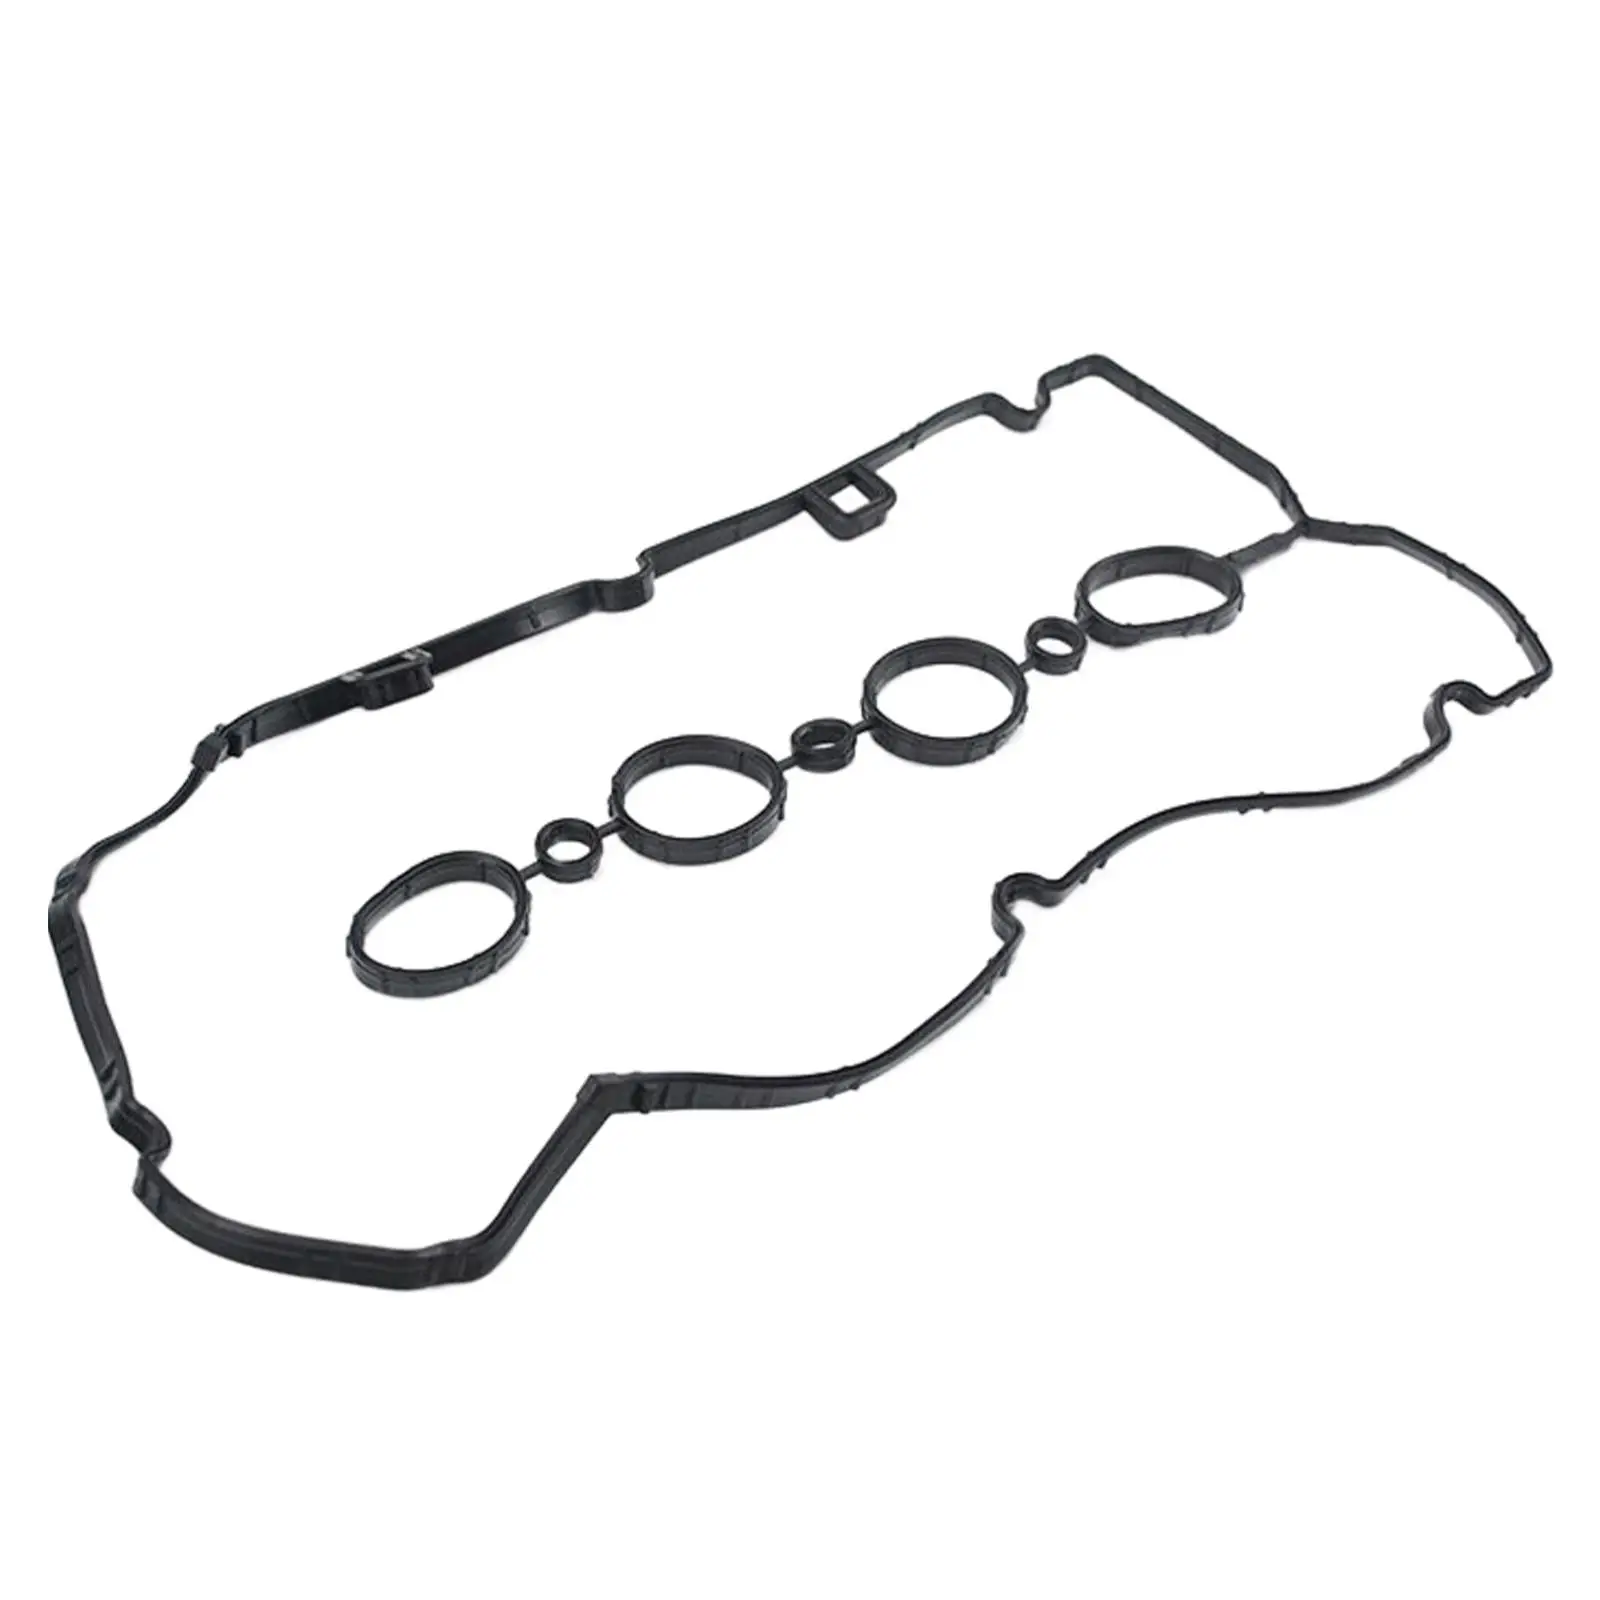 Automotive Engine Cover Gasket, 55354237 Replacement Fit for Aveo 1.6L